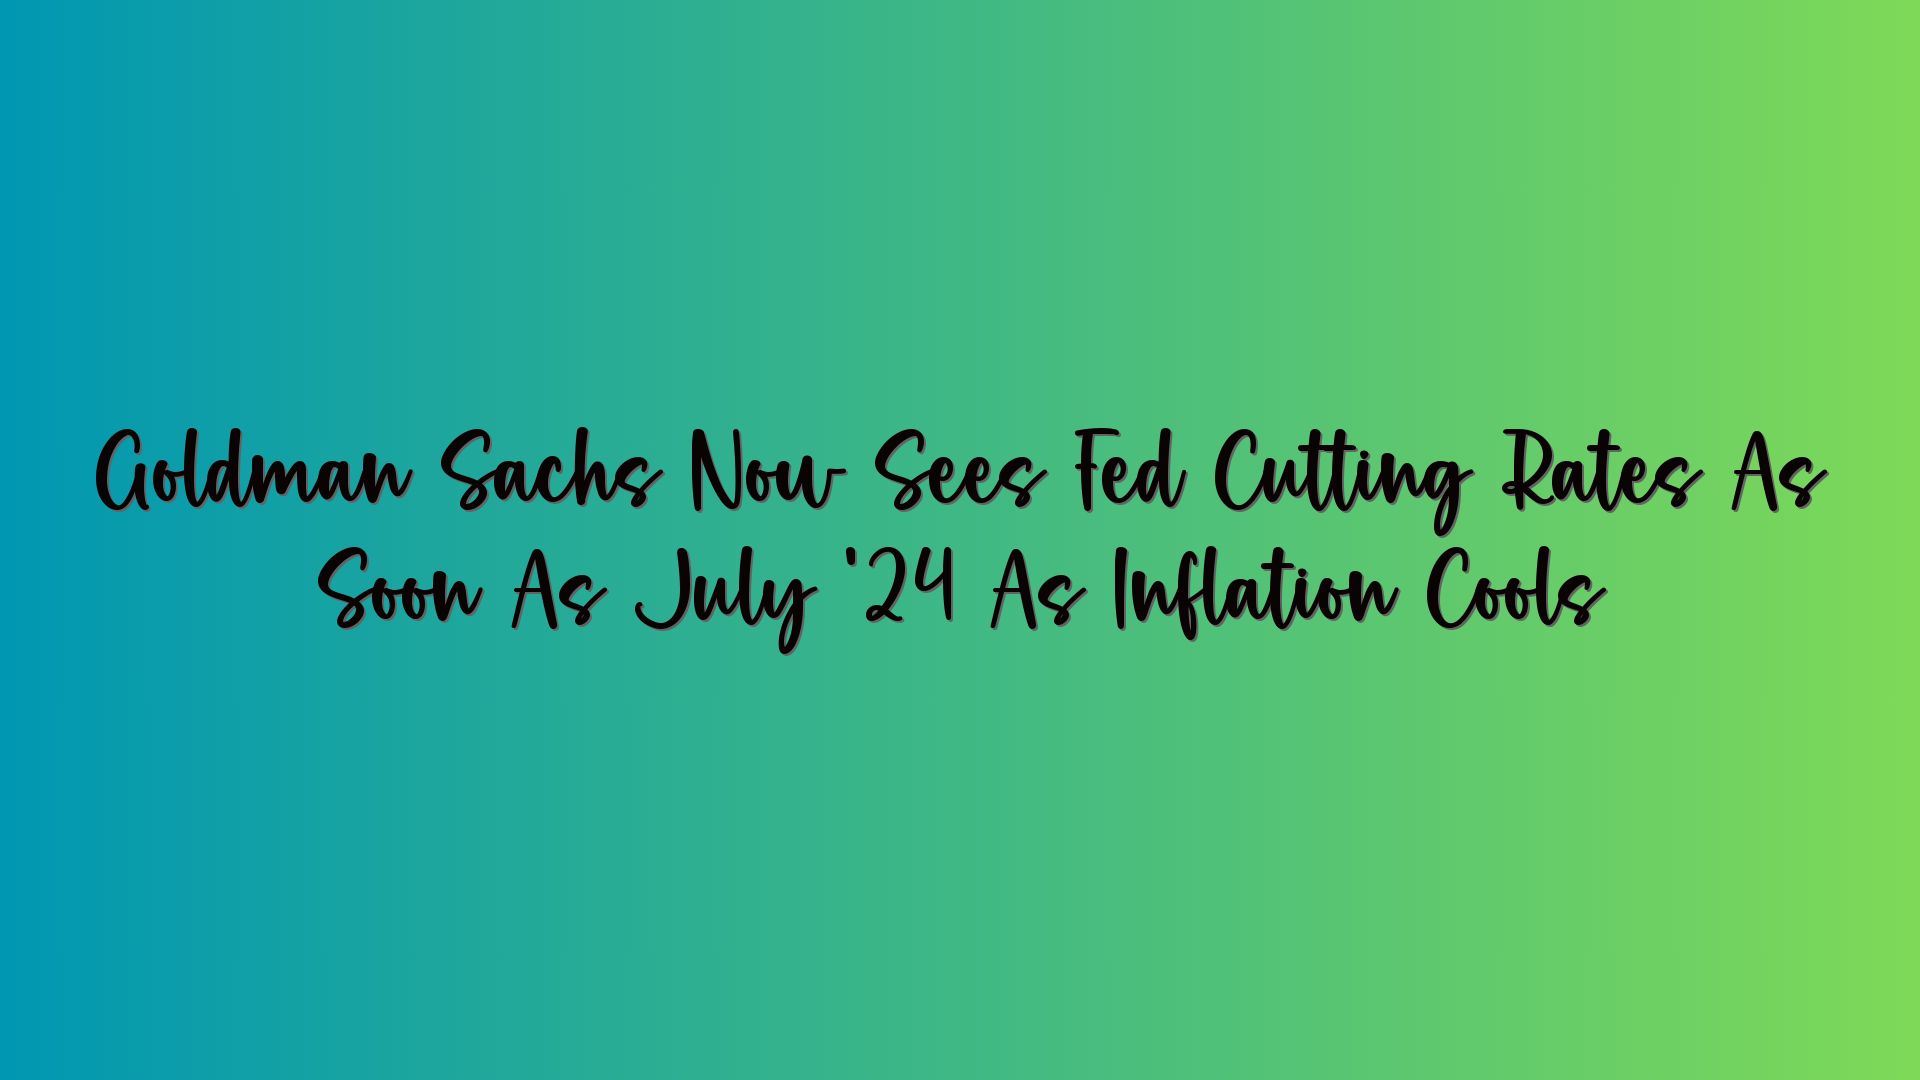 Goldman Sachs Now Sees Fed Cutting Rates As Soon As July ’24 As Inflation Cools